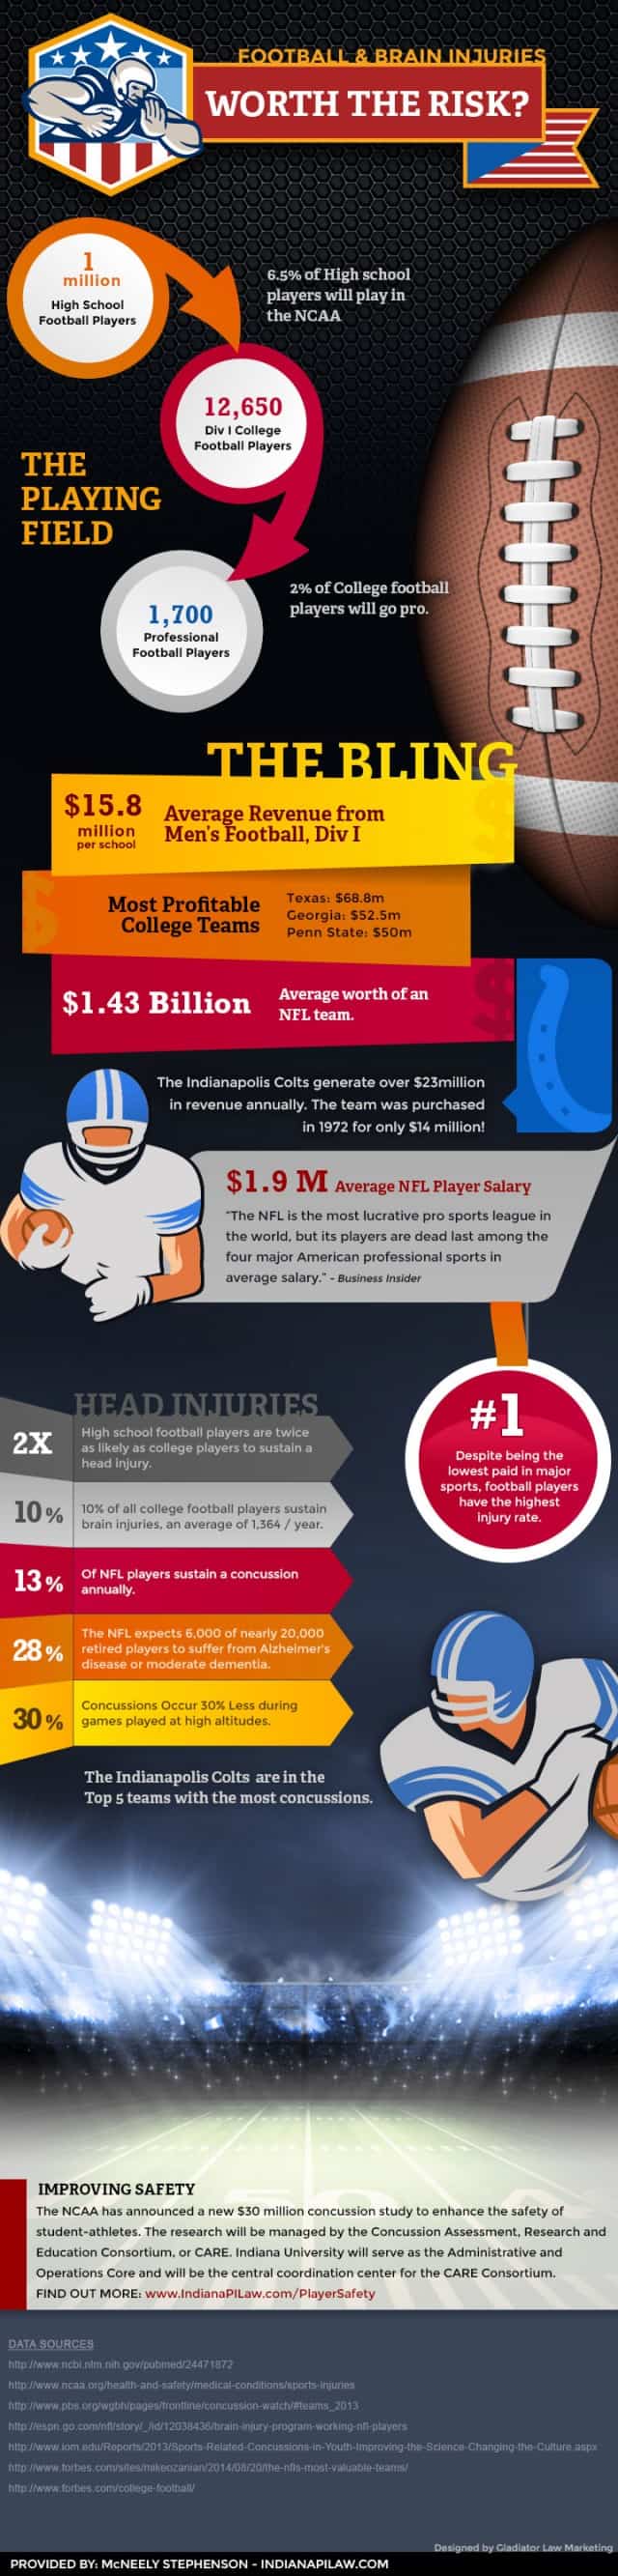 Football and Injury Infographic